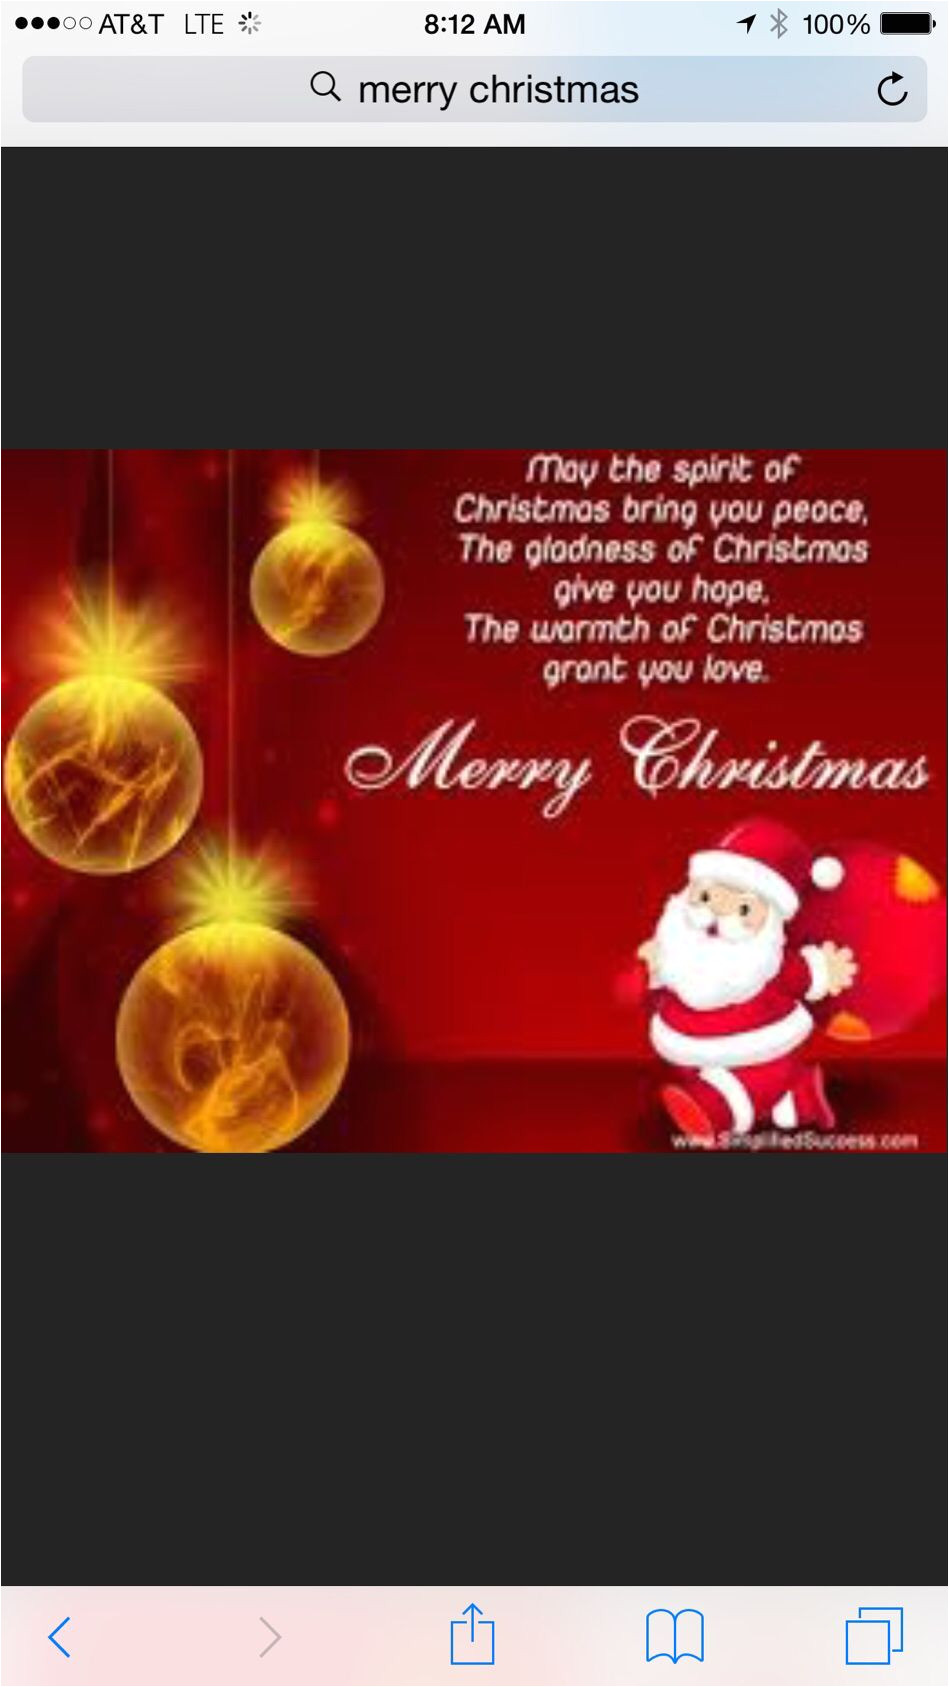 Christmas Wishes Card for Friends Merry Christmas Everyone with Images Merry Christmas